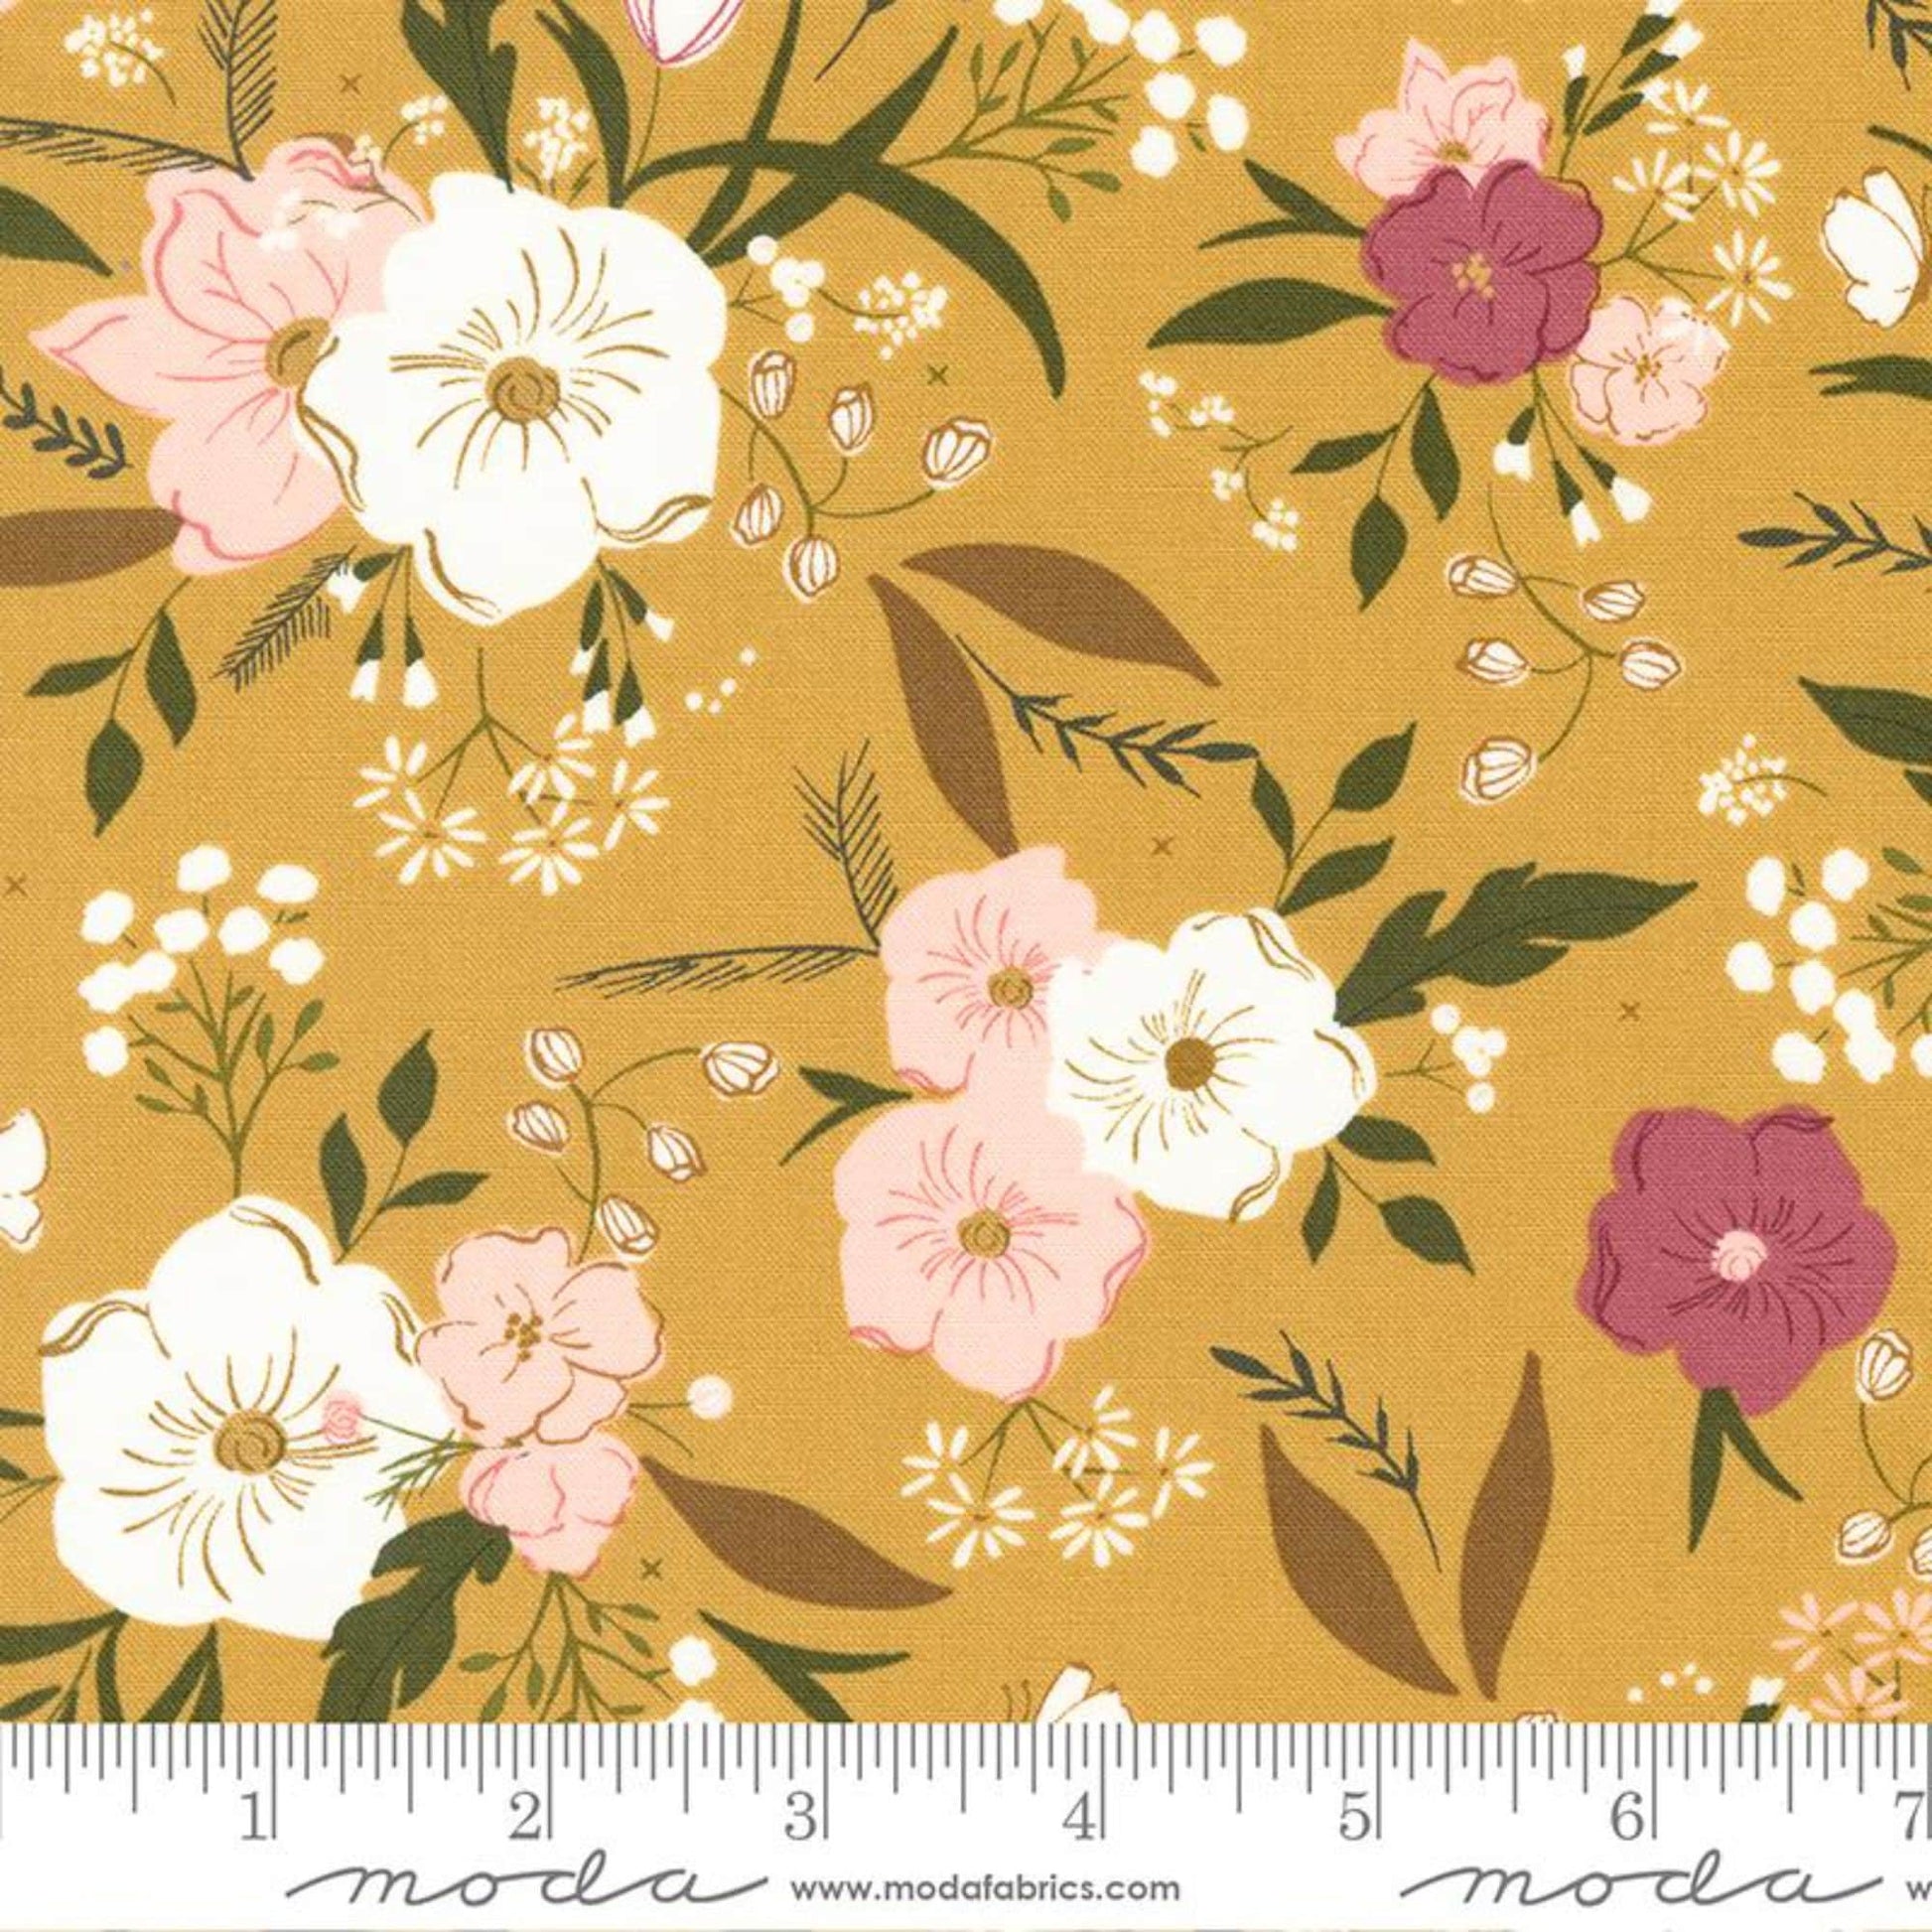 Woodland Bouquet Honey Evermore Sweetfire Road Moda Quilters Cotton 43150 13 Fabric Fetish